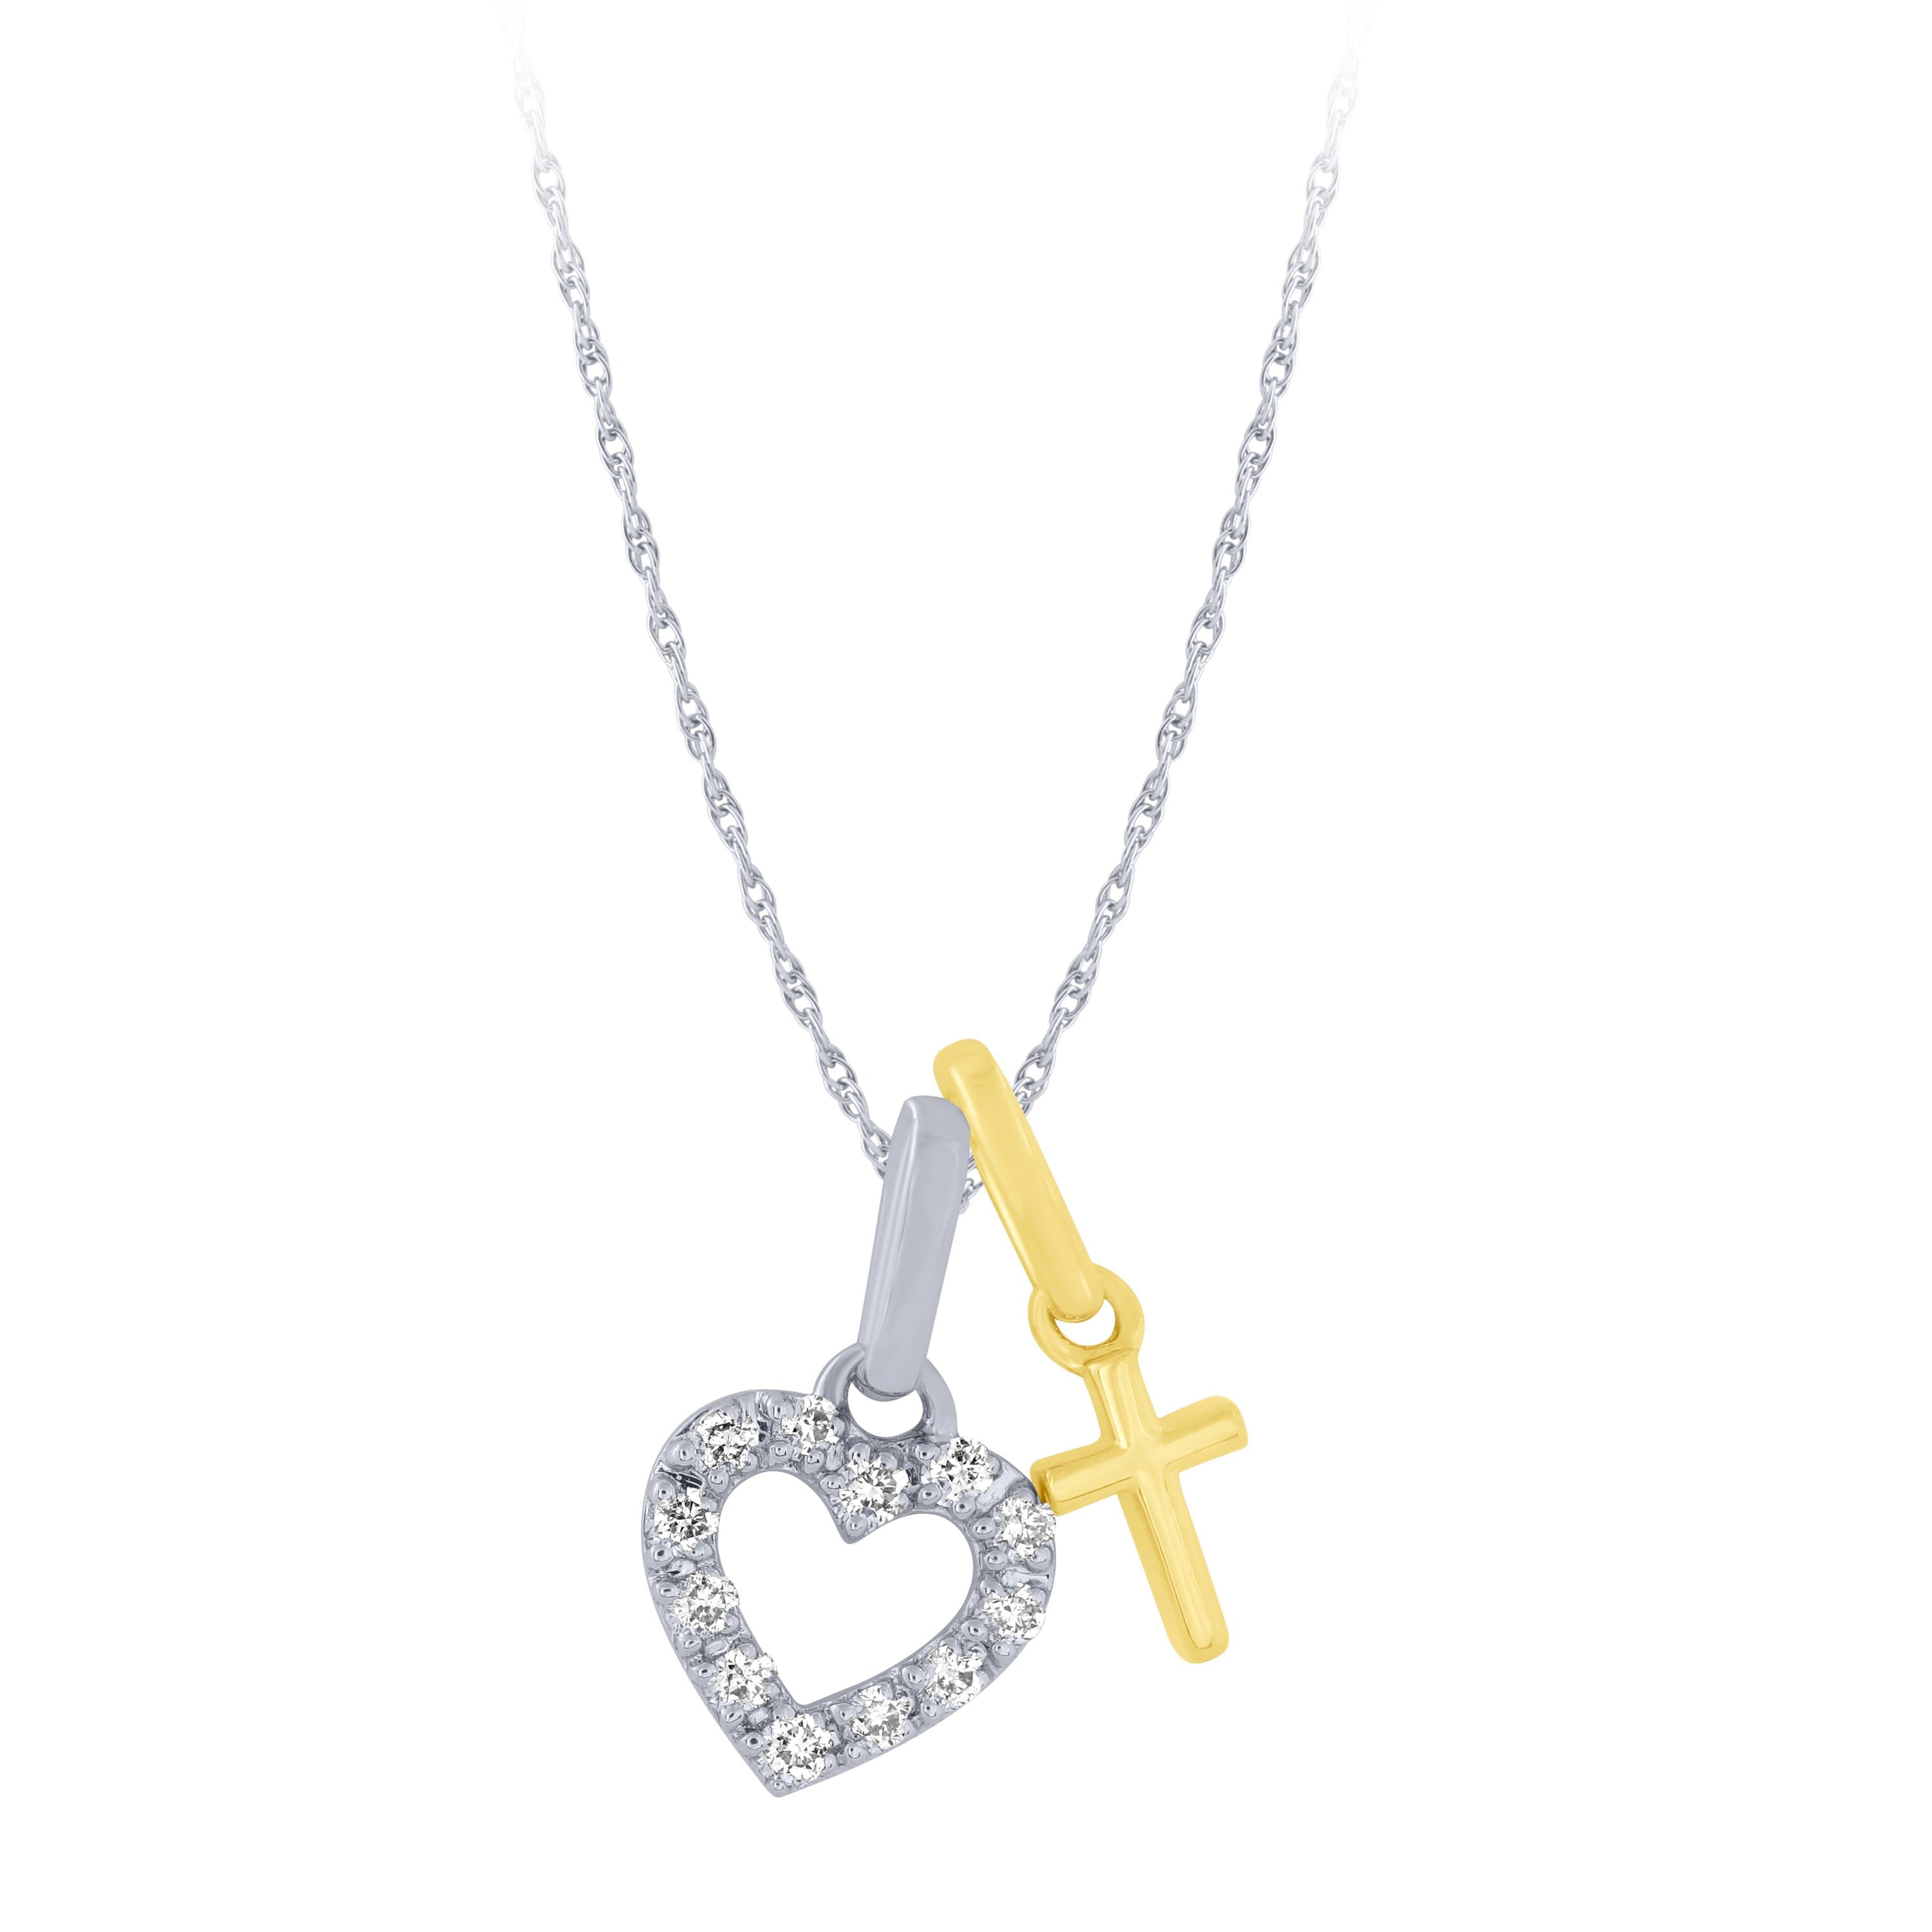 AFH Lord Jesus Holy Love Cross Silver Cord Chain Pendant Necklace Chain  Stainless Steel Pendant Price in India - Buy AFH Lord Jesus Holy Love Cross  Silver Cord Chain Pendant Necklace Chain